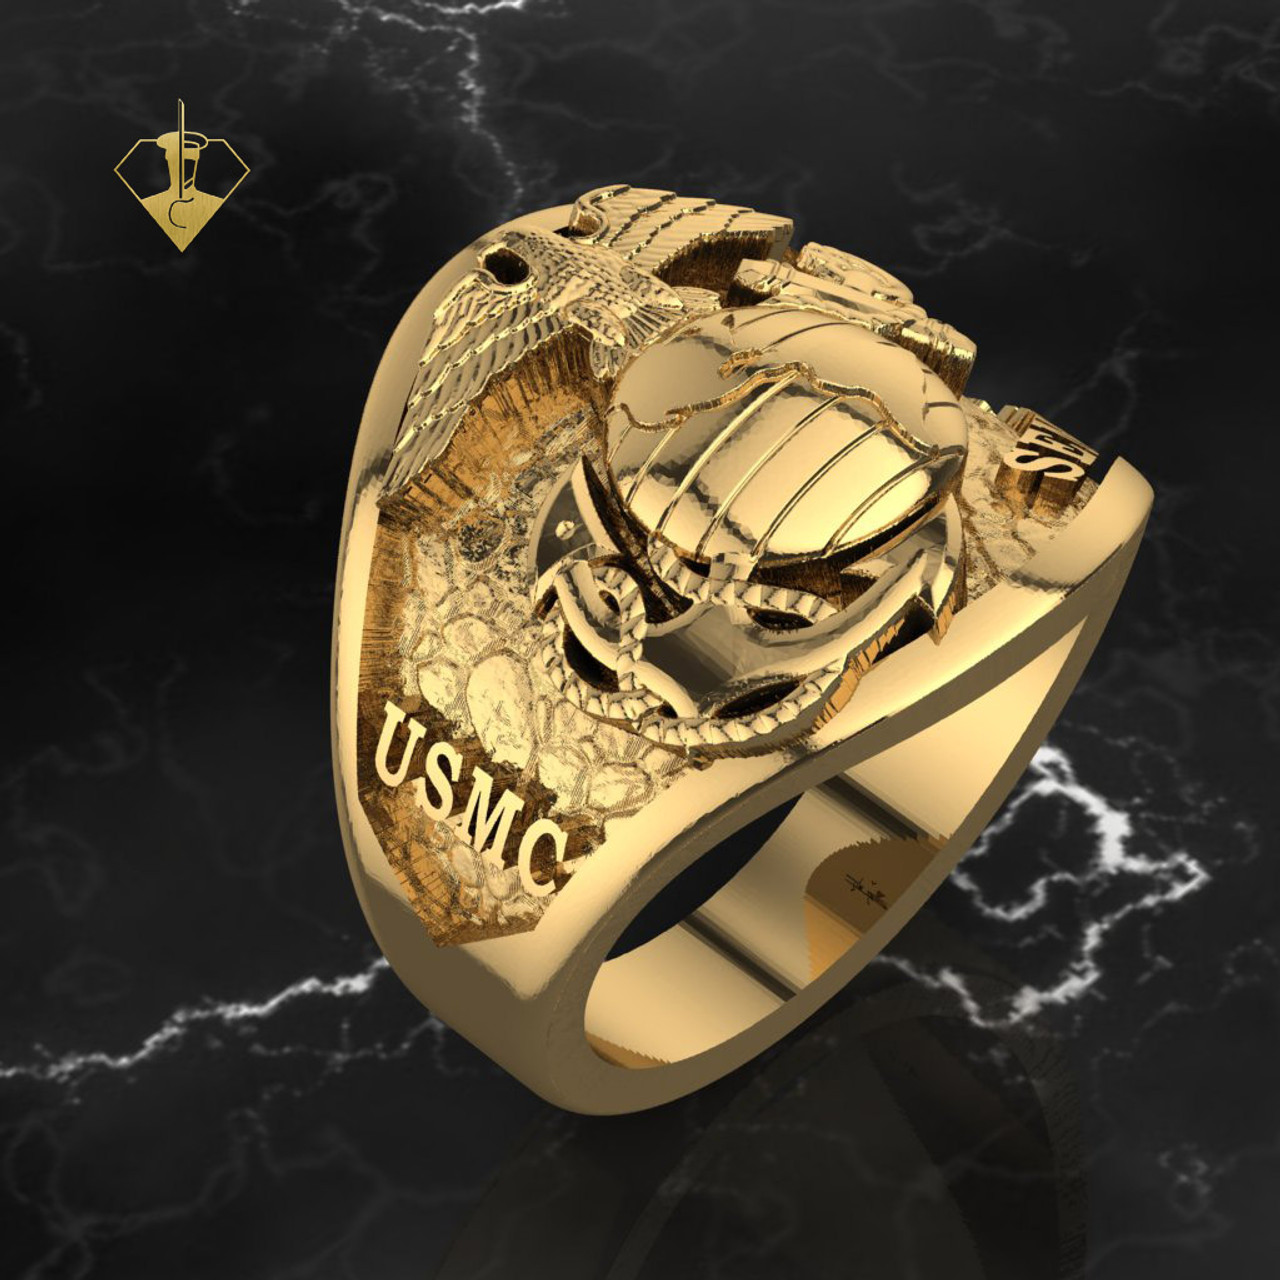 Semper Fi and USMC on a rock background with our beloved Eagle Globe and Anchor in
the center made in solid 10k Gold. This Marine Corps Ring says it all and the
bottom of the band is 2mm thick is made to last a lifetime.
Created and Made by a Marine for Marines.